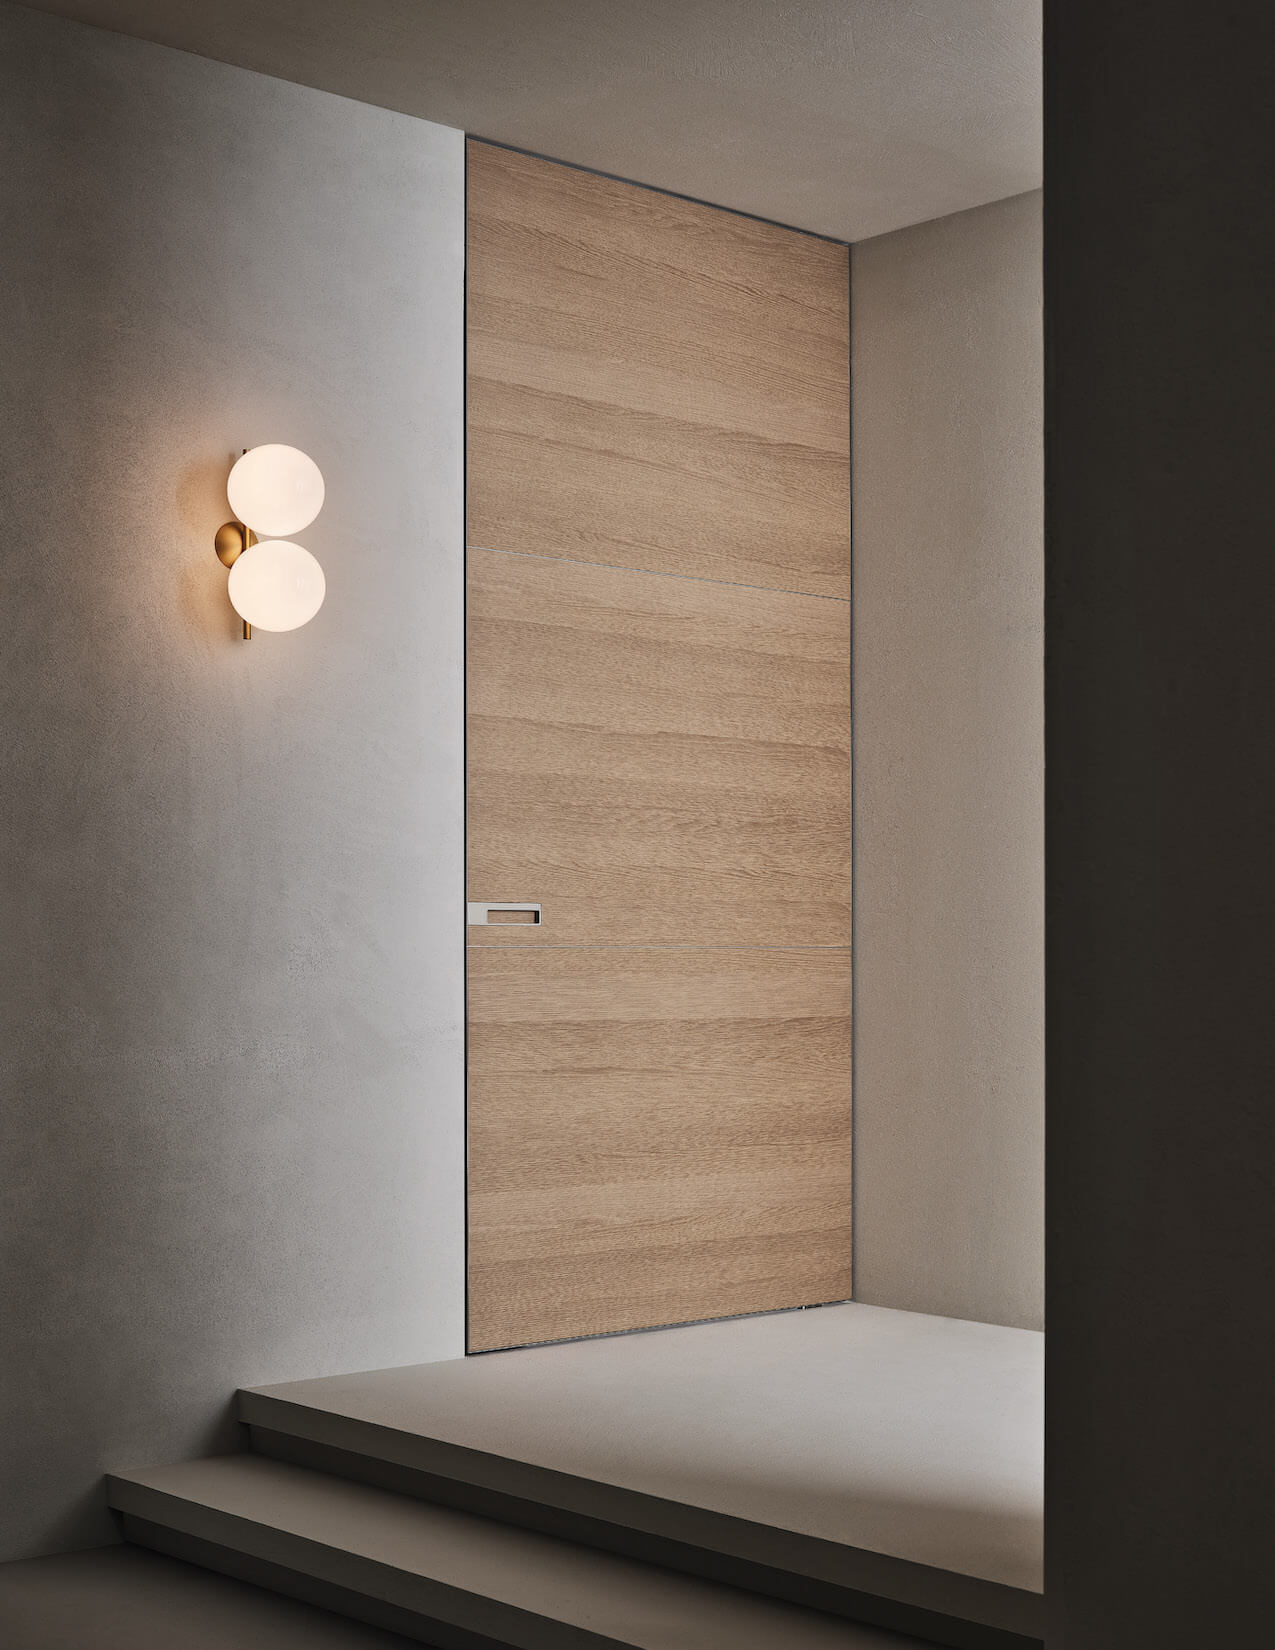 A wooden door fits smoothly into a beige wall